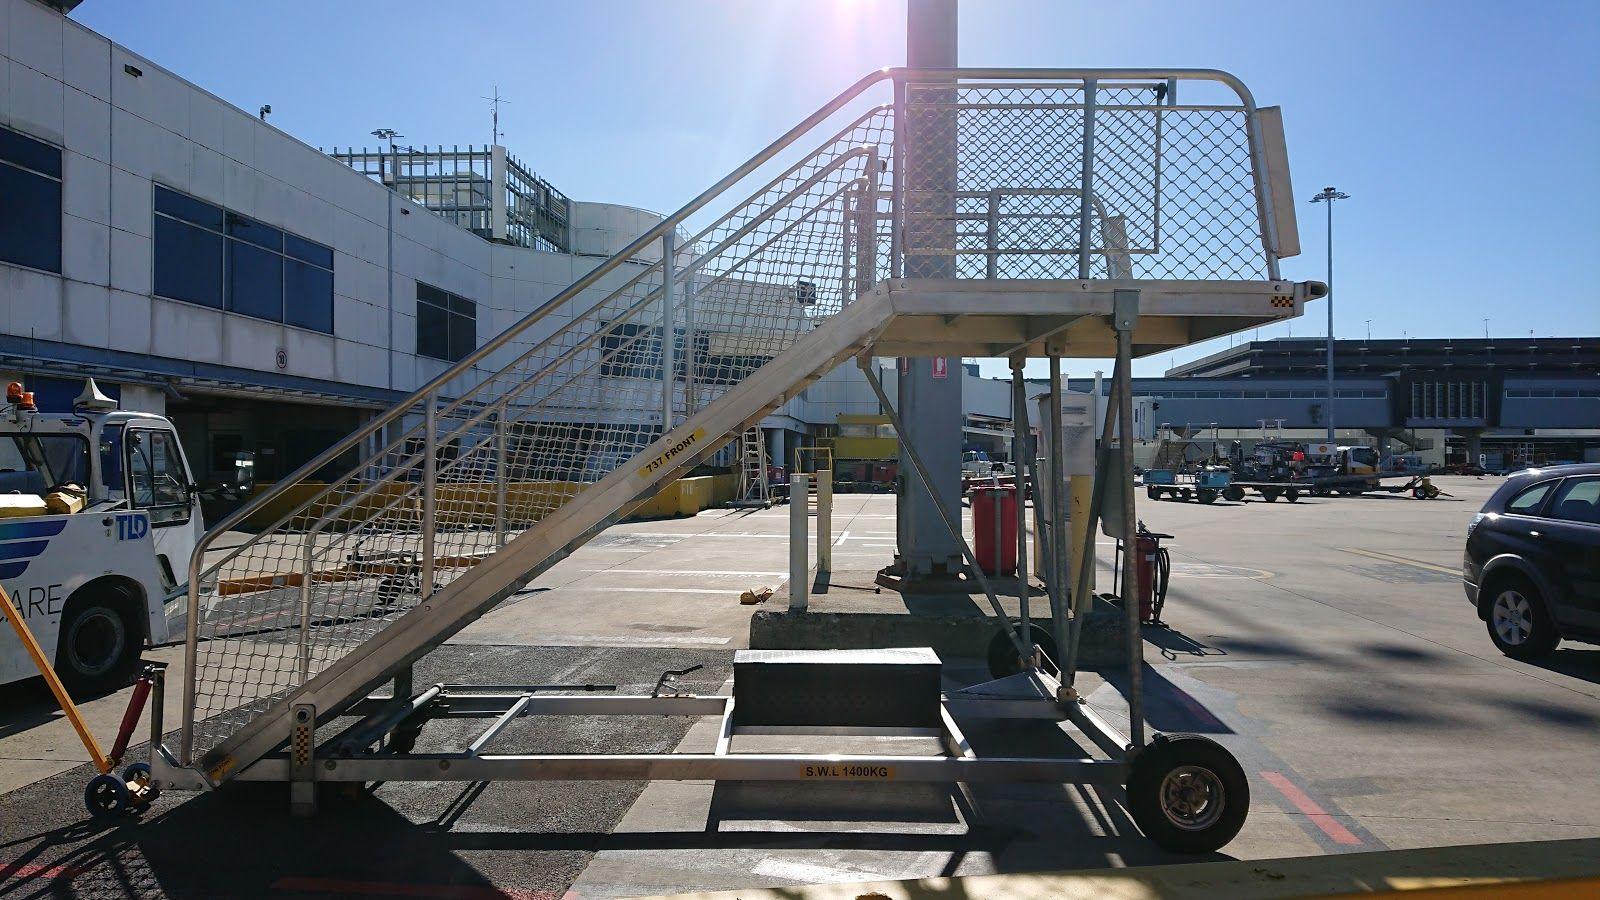 Used forklift: PASSENGER STAIRS - Towable STAIRS - Towable